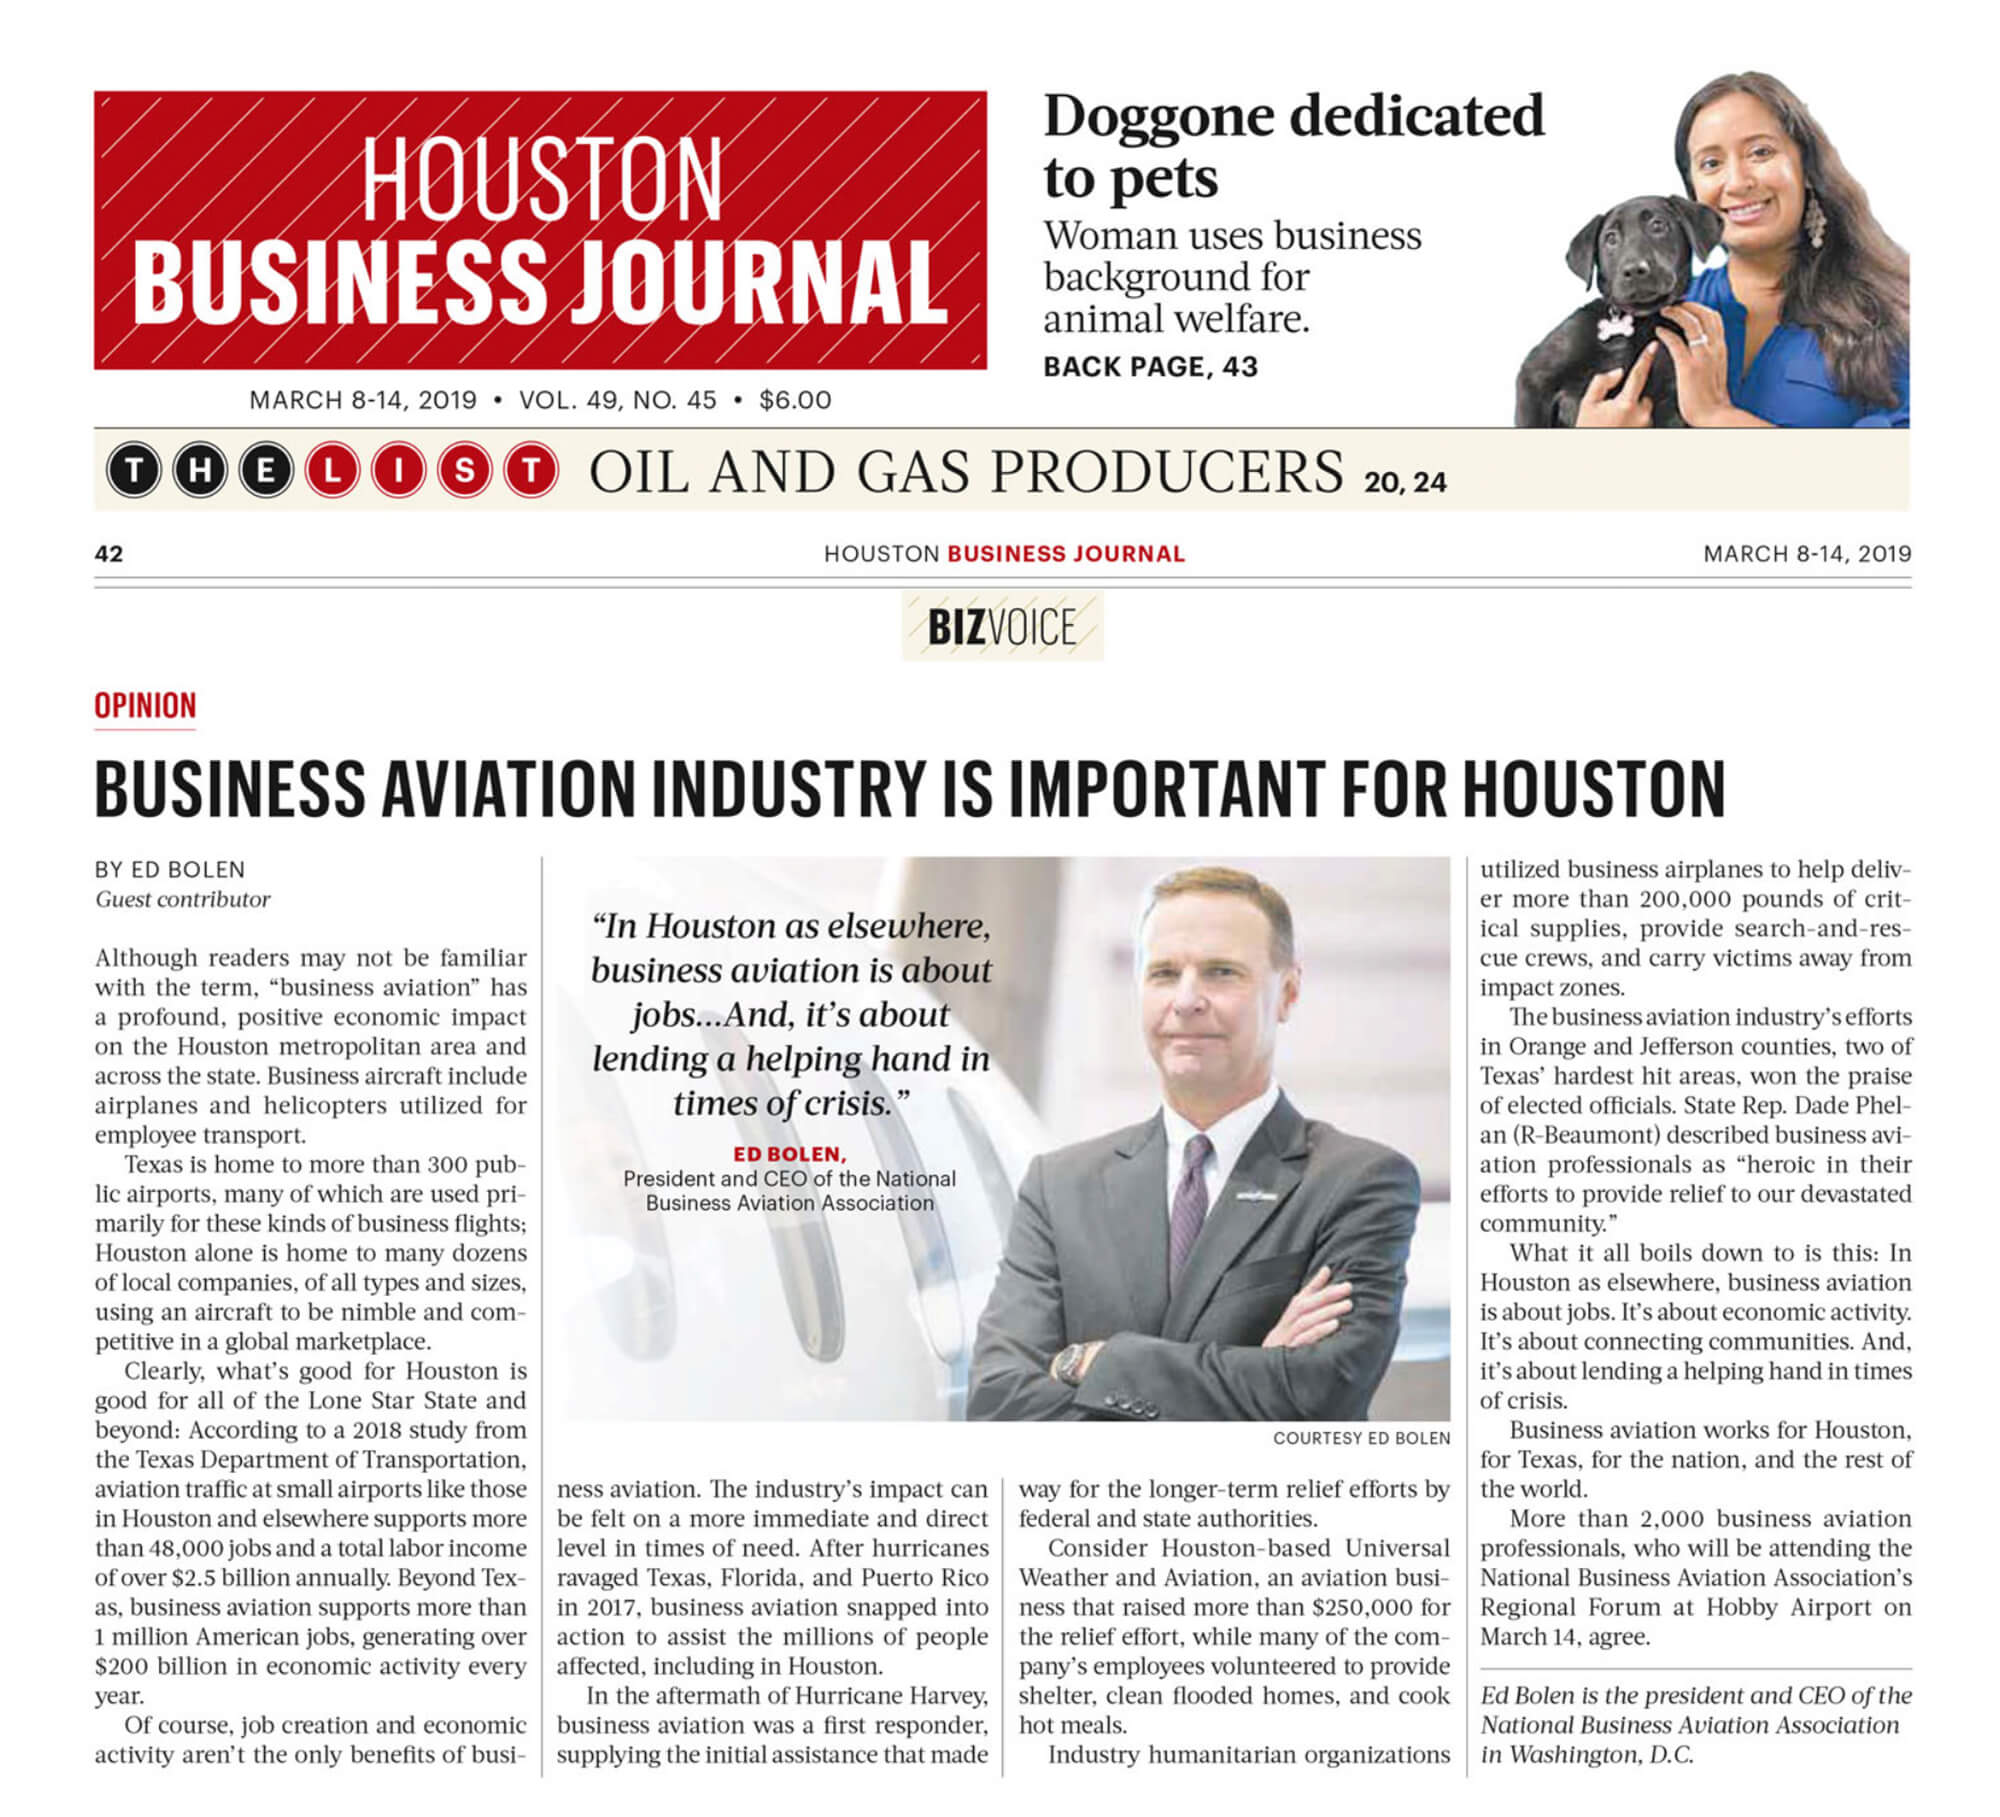 Houston Backpages